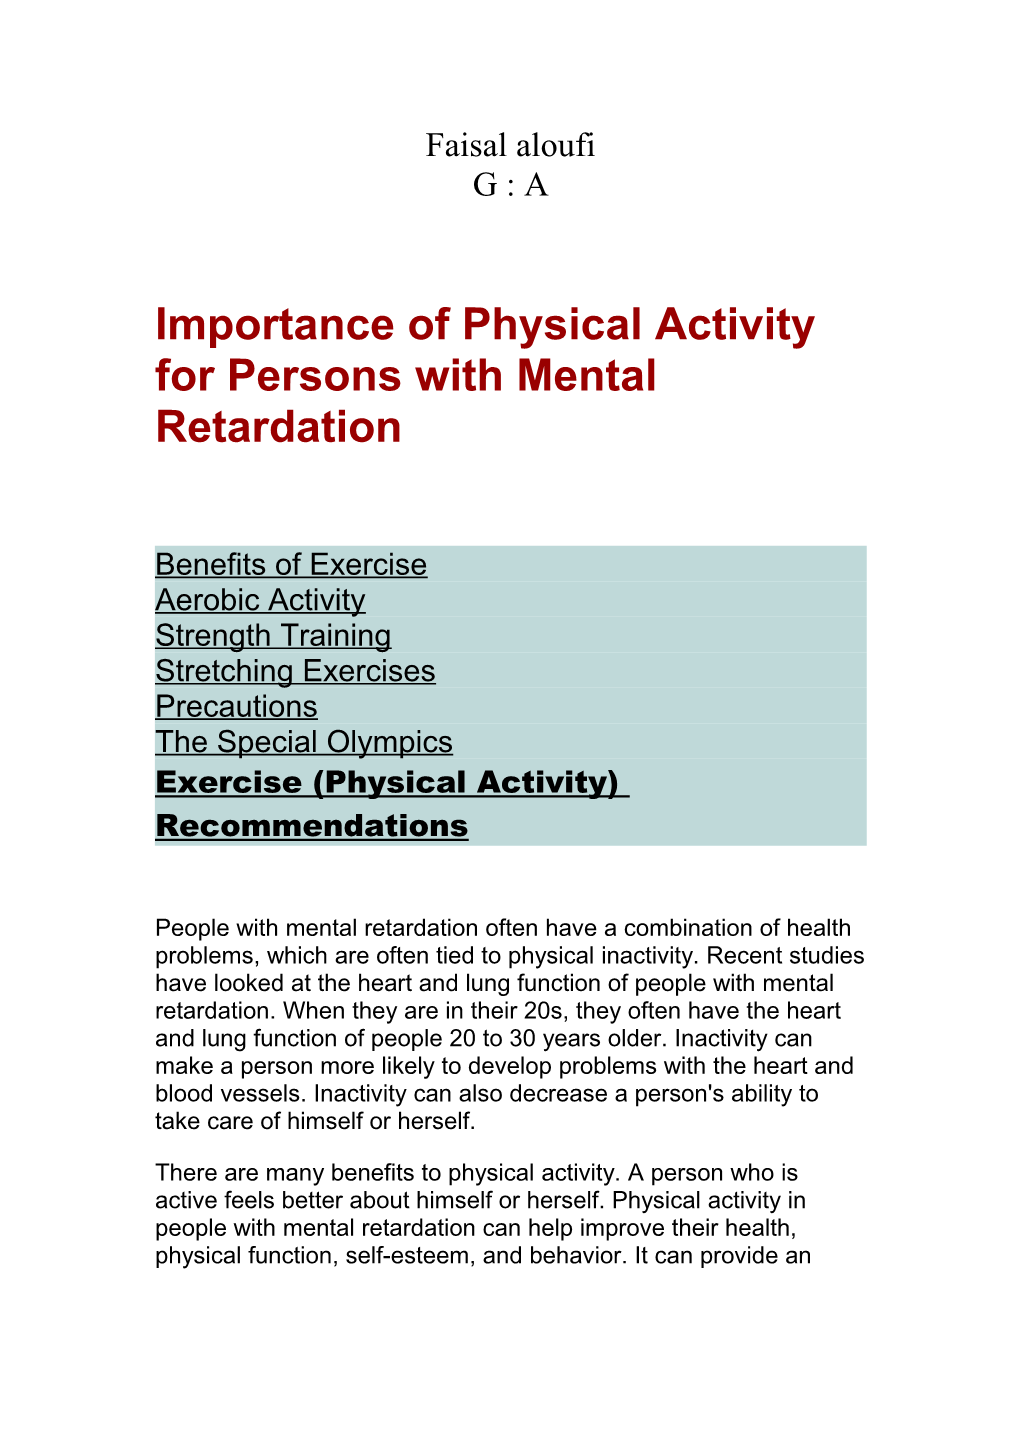 Importance of Physical Activity for Persons with Mental Retardation